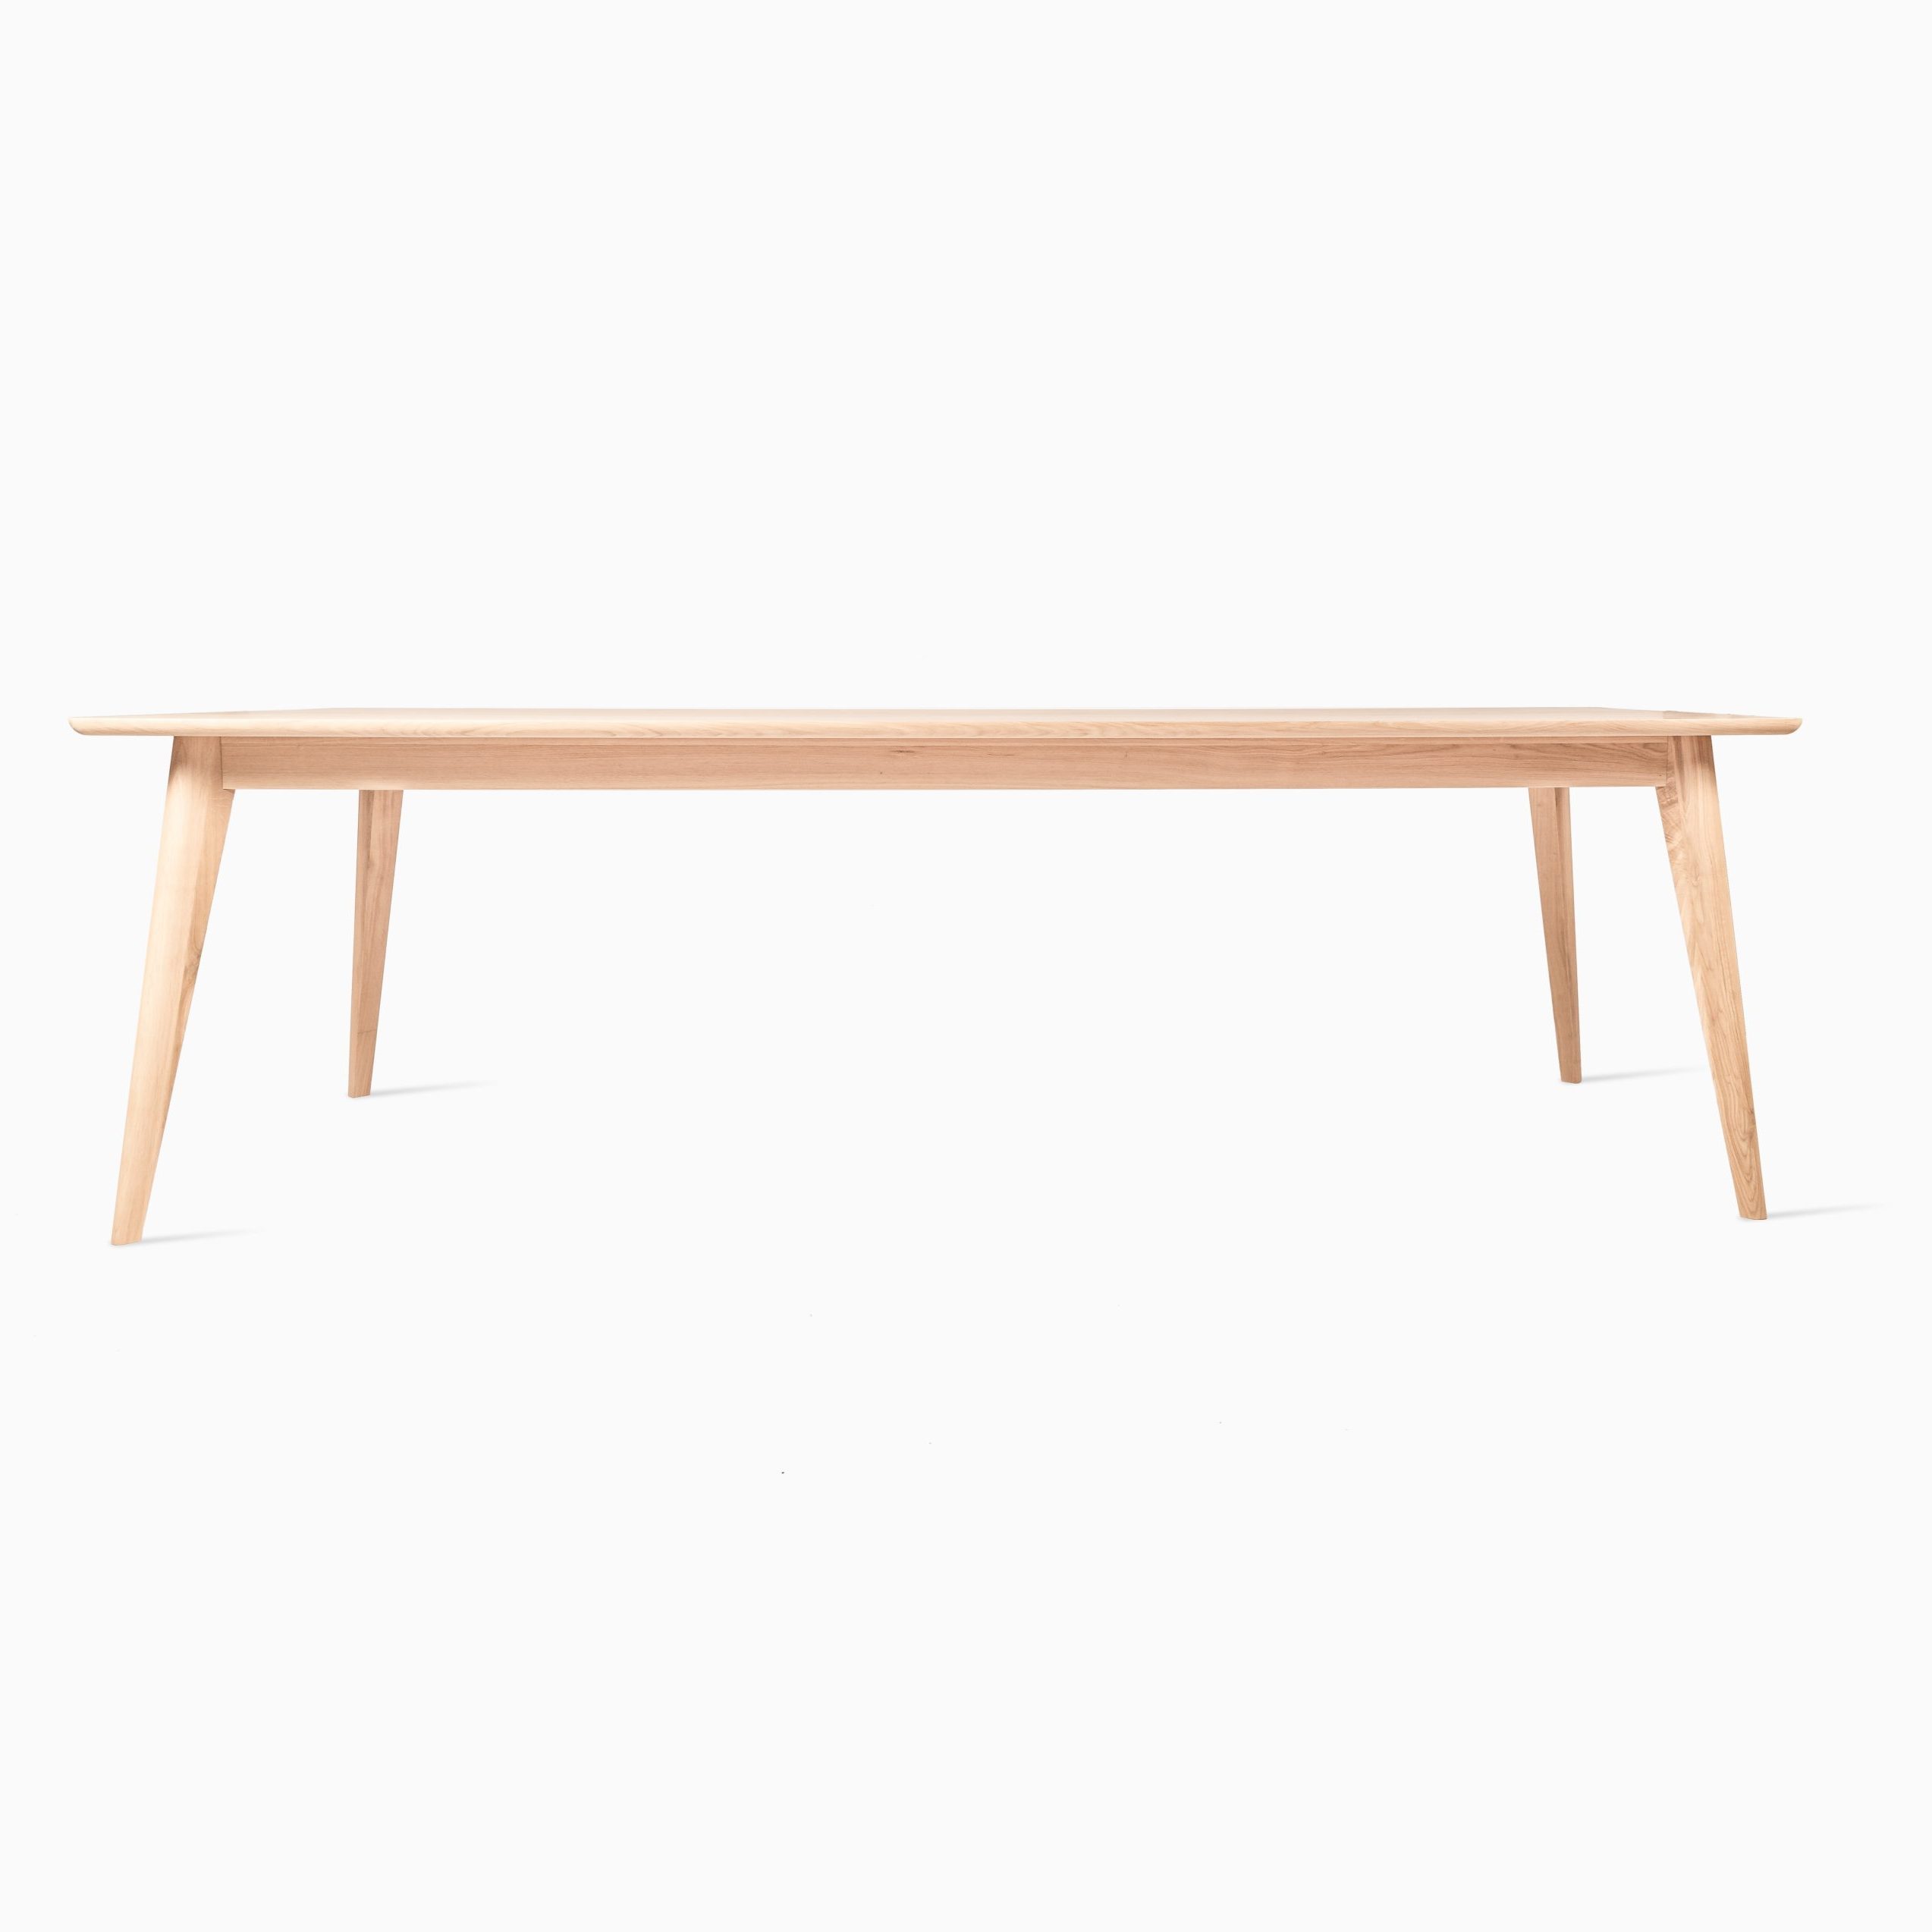 Eric Dining Table 2200 x 1000mm - American Oak